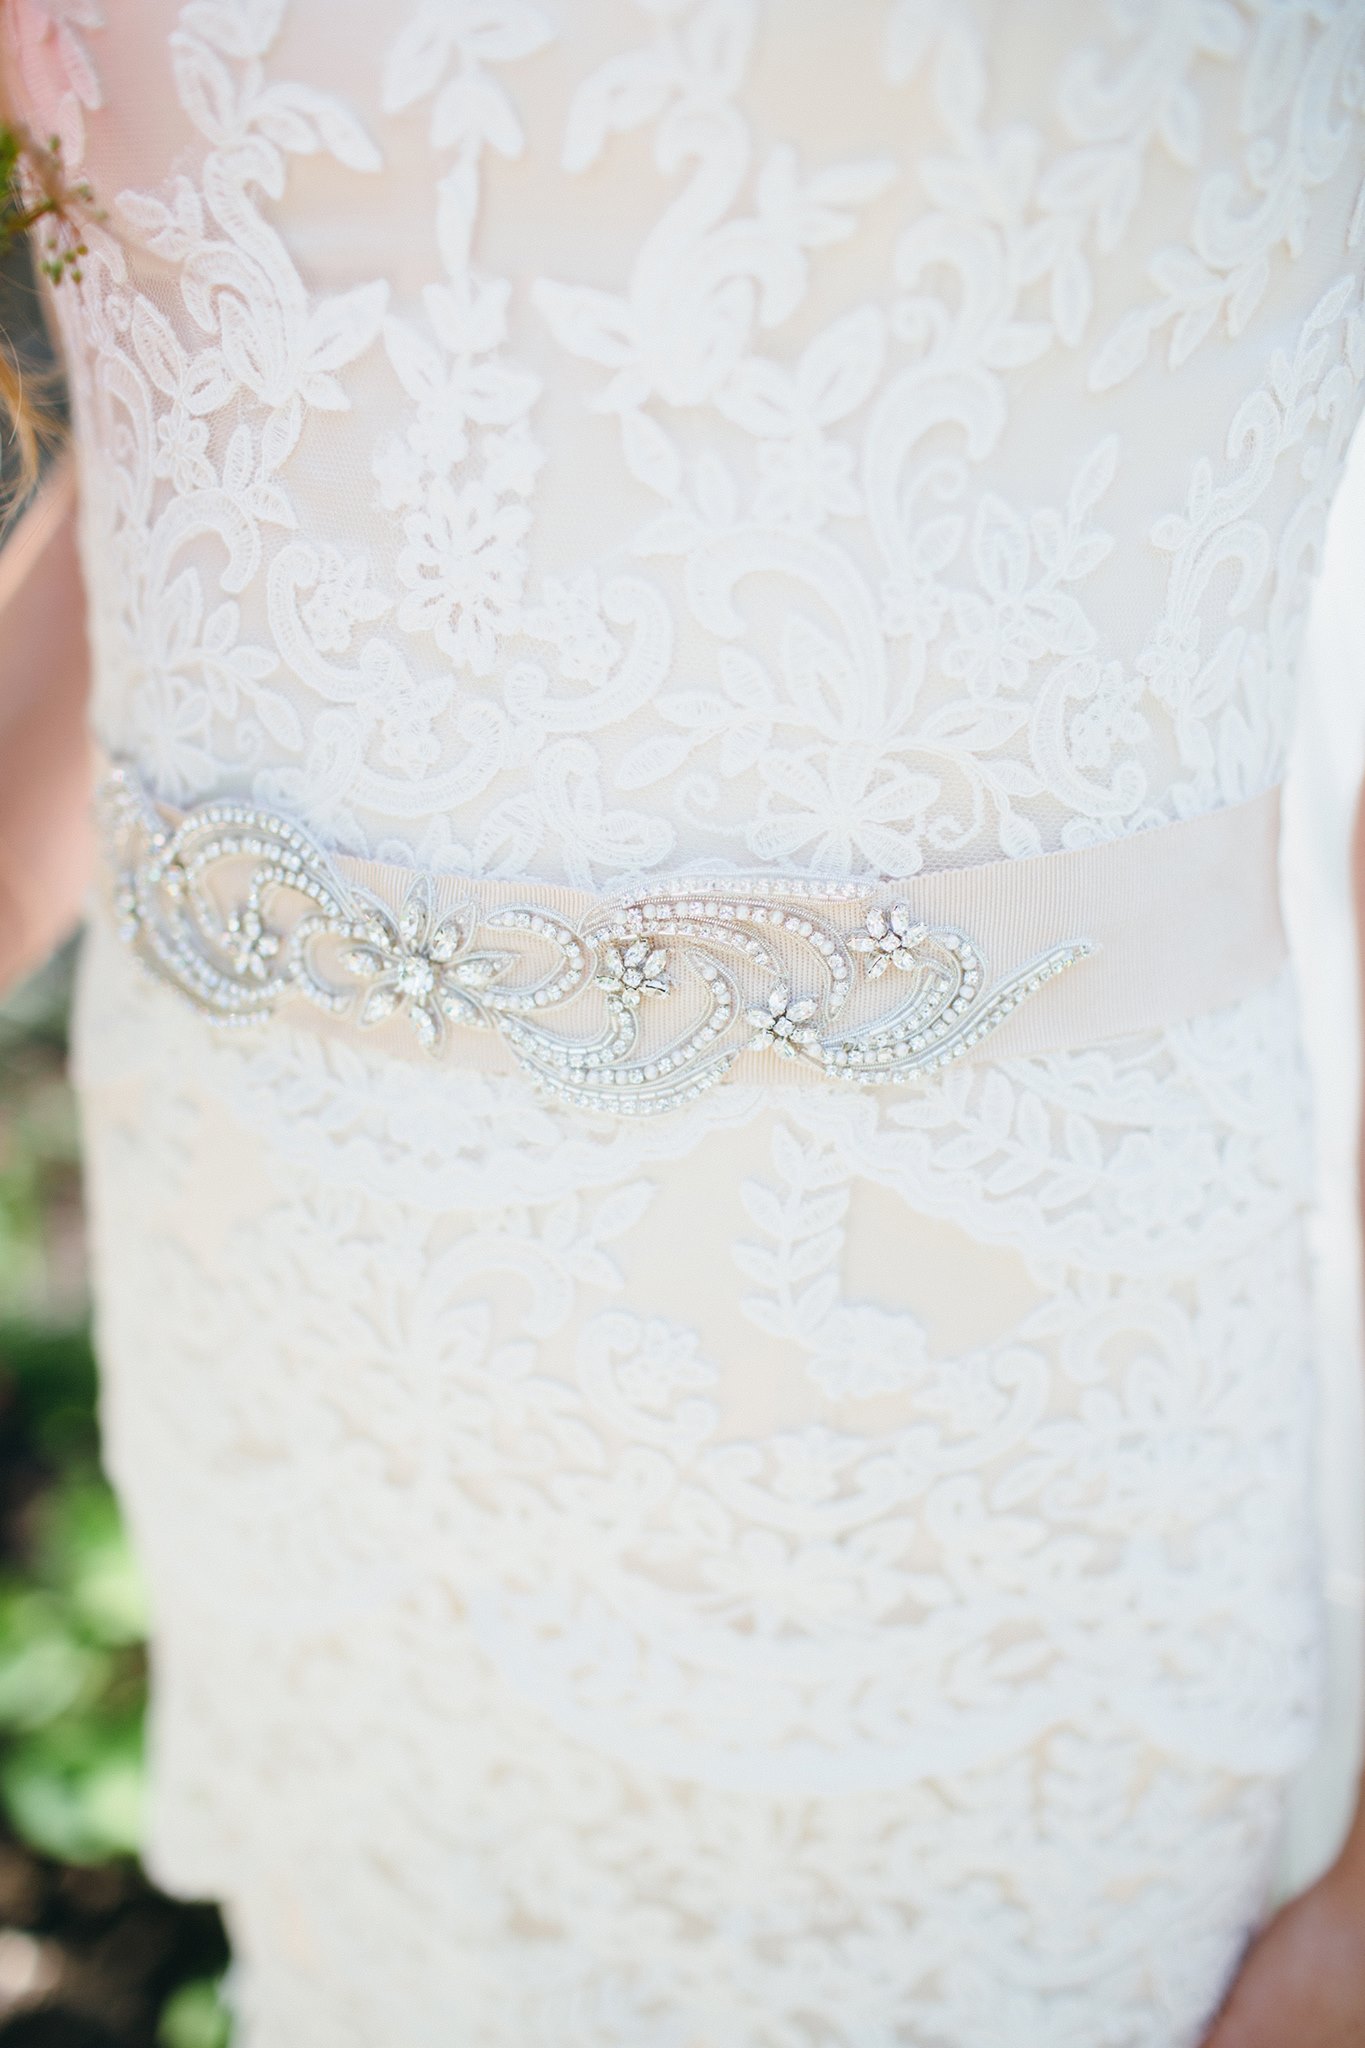 How to Find the Perfect Wedding Gown